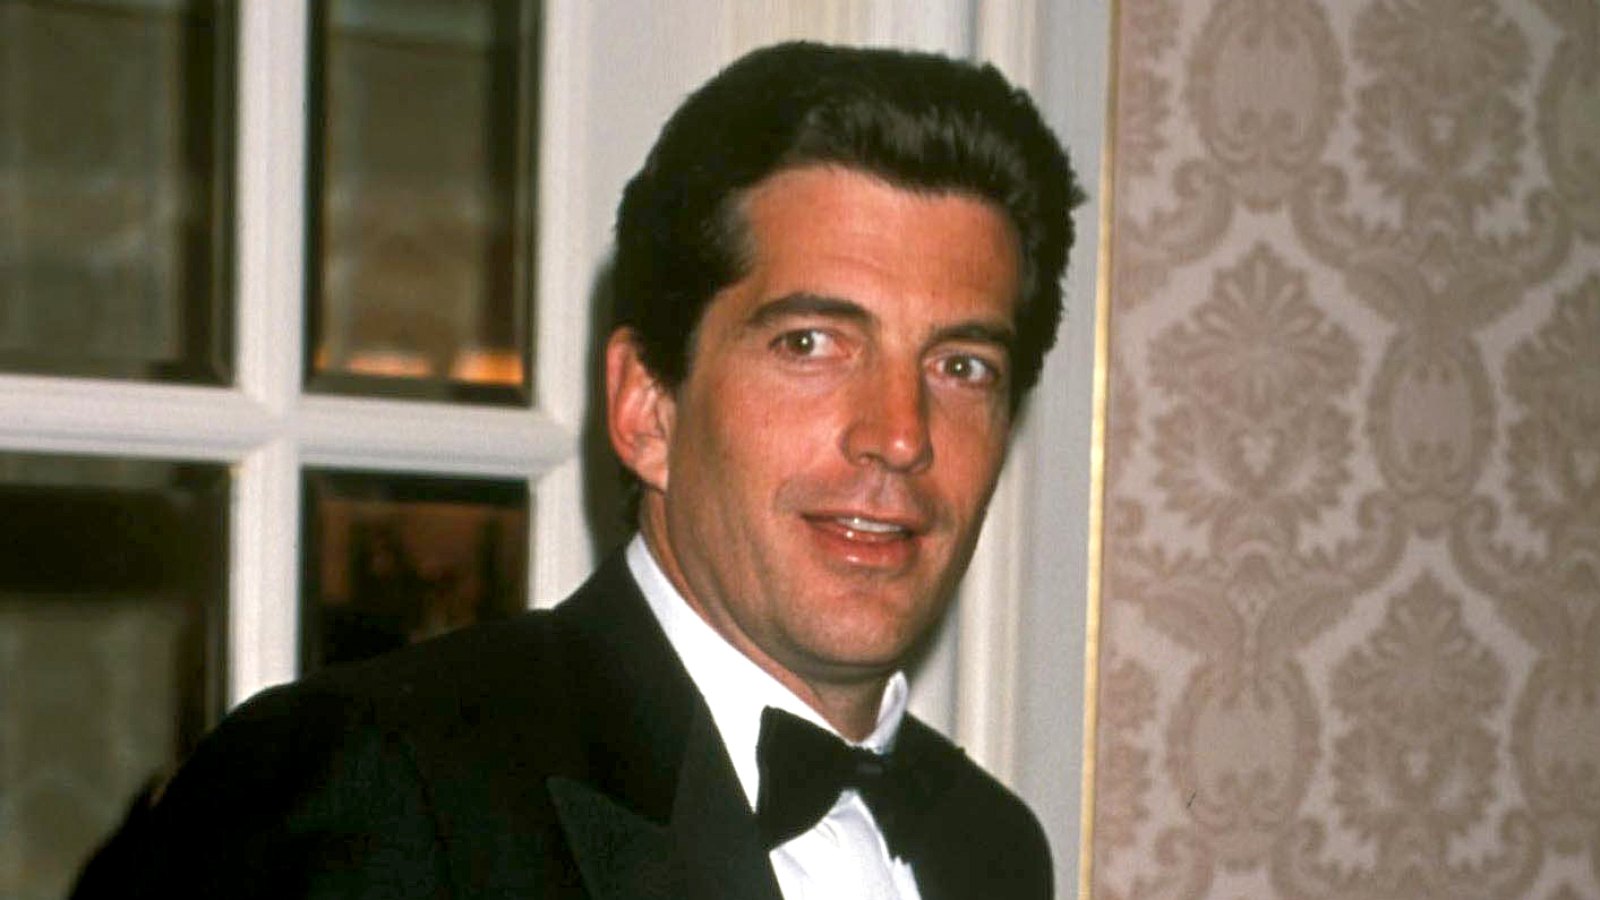 John-F.-Kennedy-Jr.-Went-Sour-on-the-Press-After-He-Courted-Their-Attention-for-Years